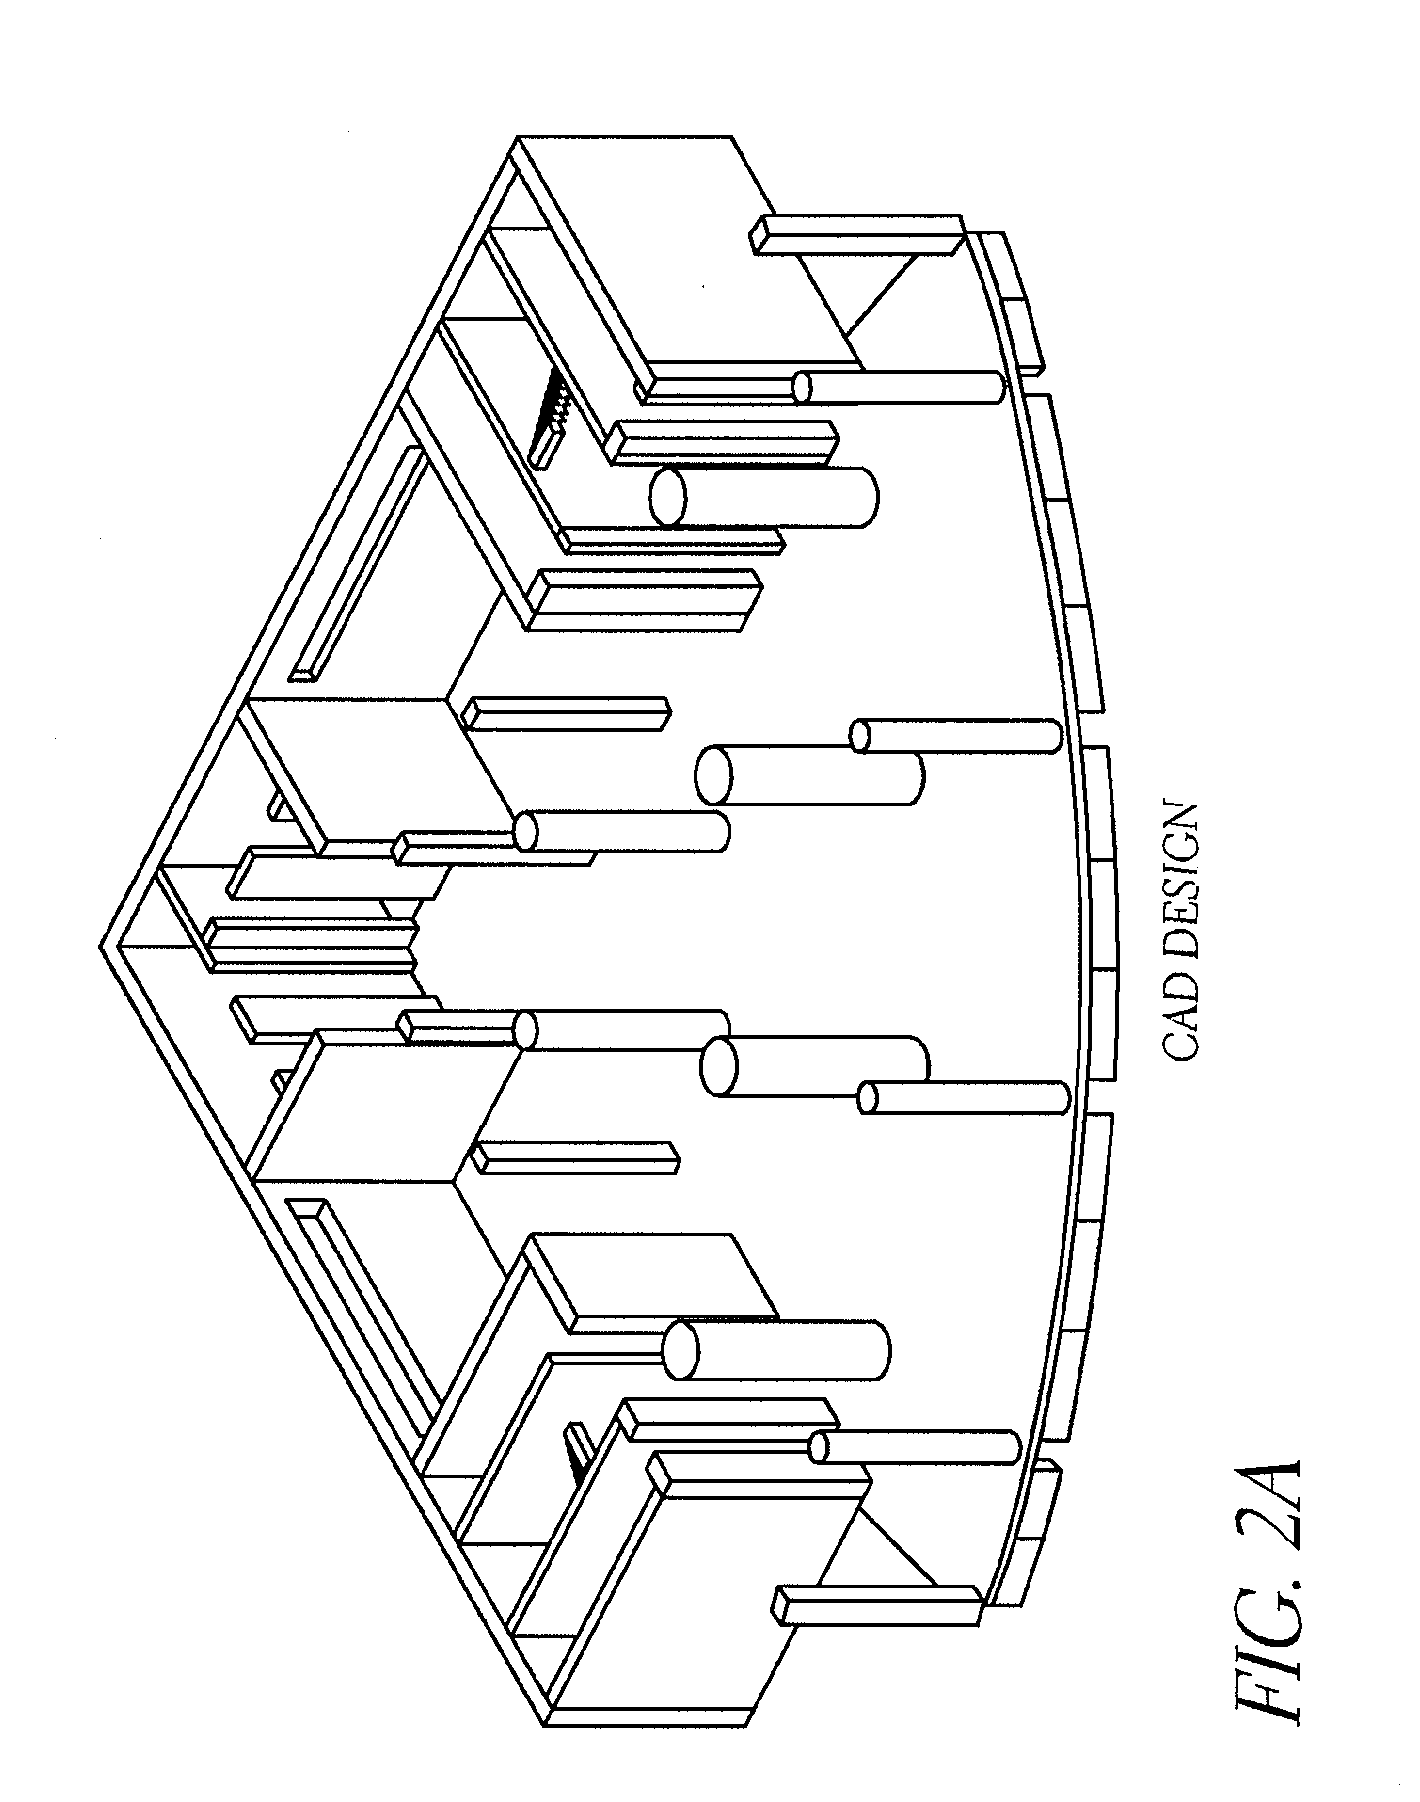 System and method for hybrid solid and surface modeling for computer-aided design environments